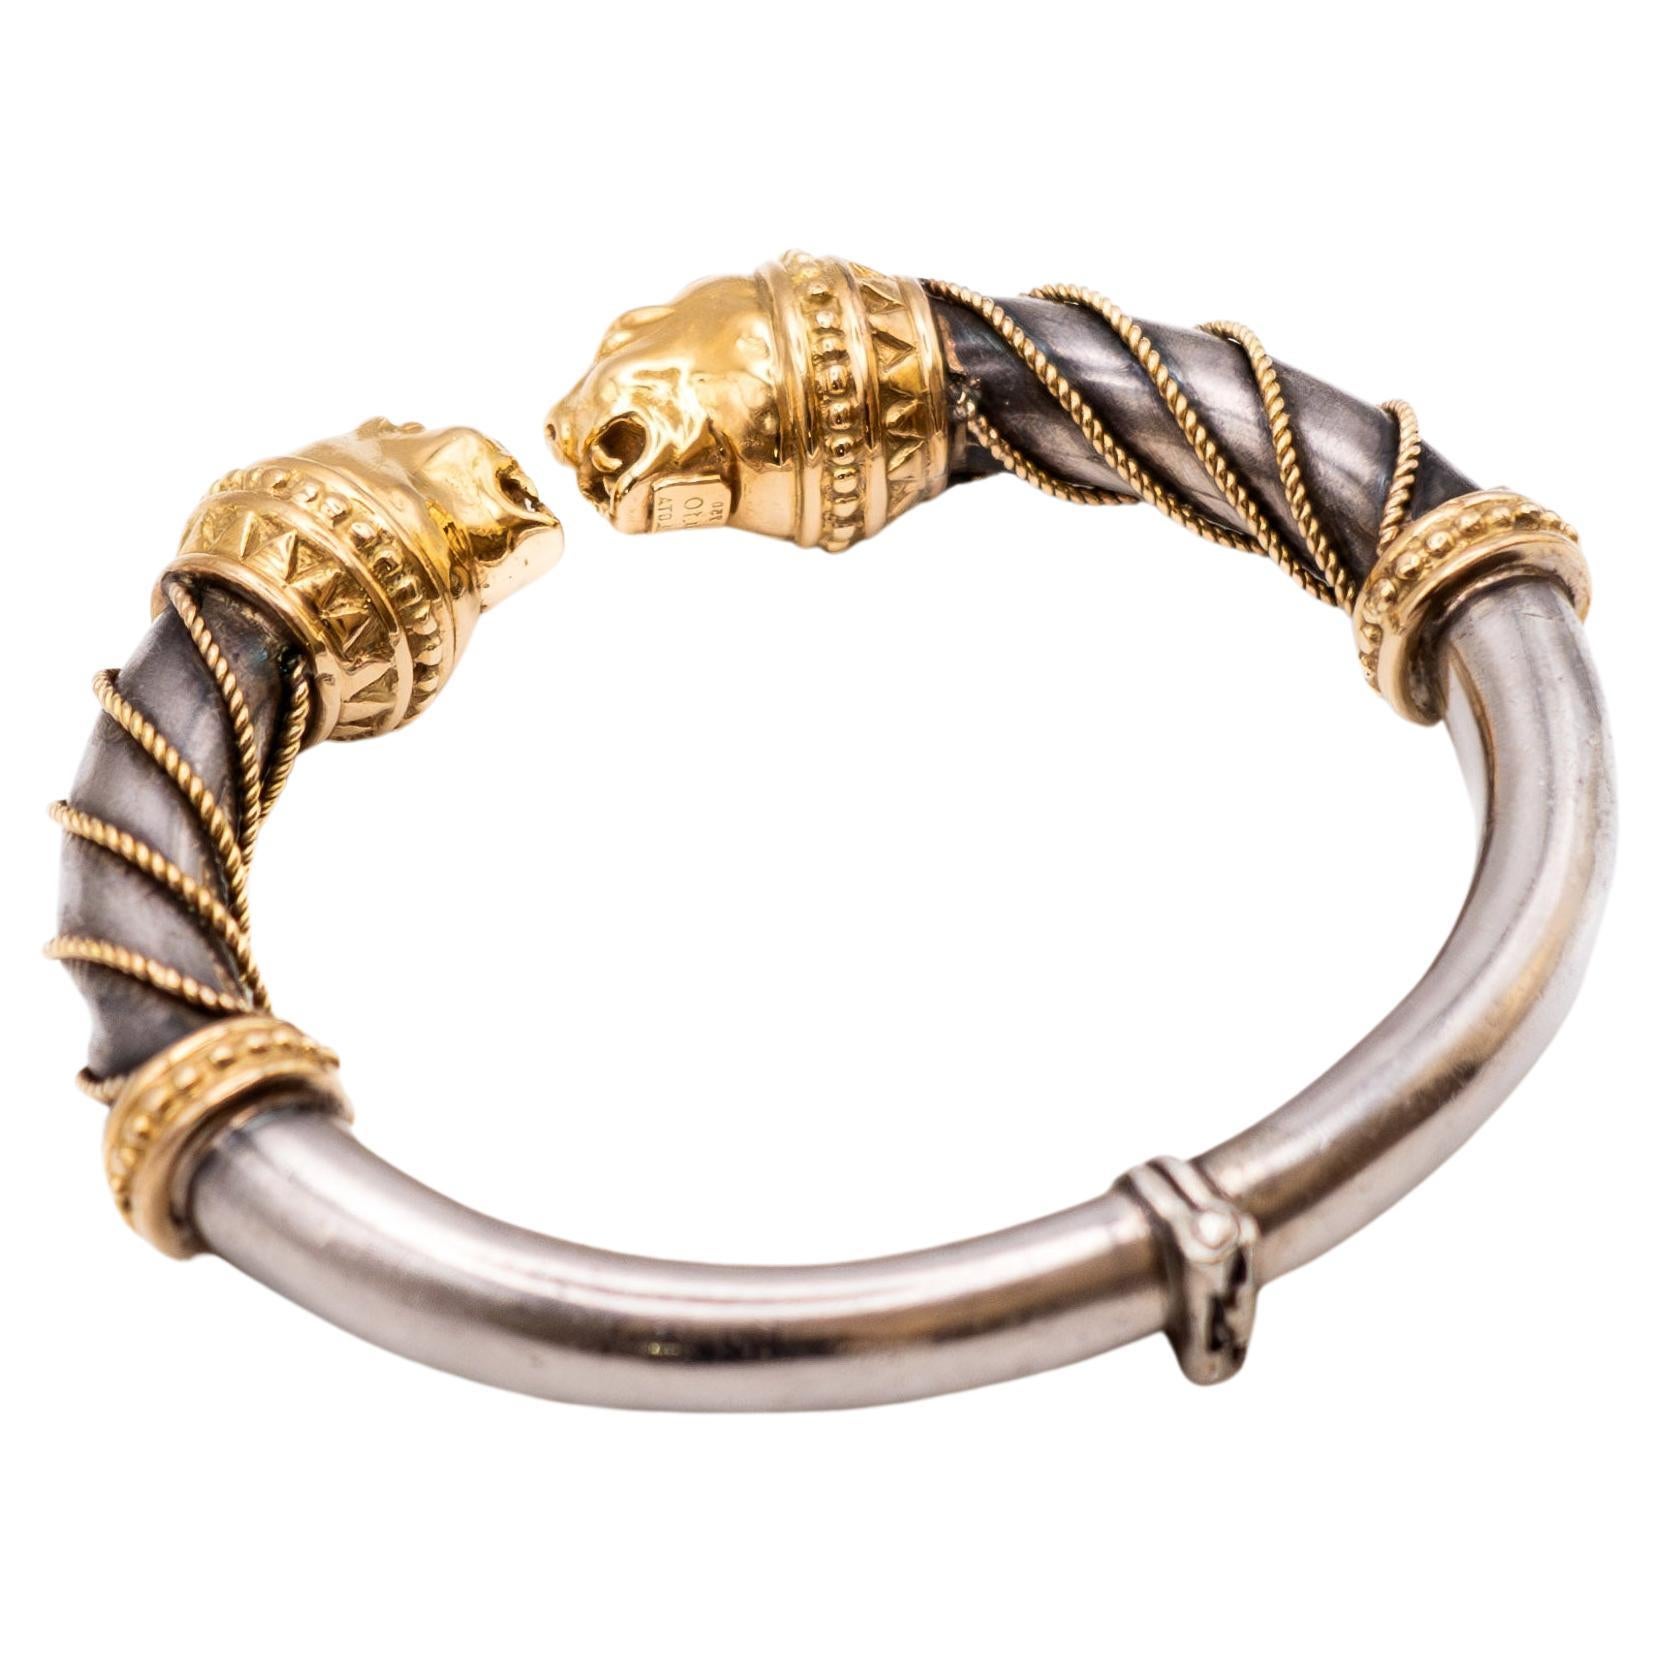 Zolotas Lion Bracelet in 18k Gold and Silver